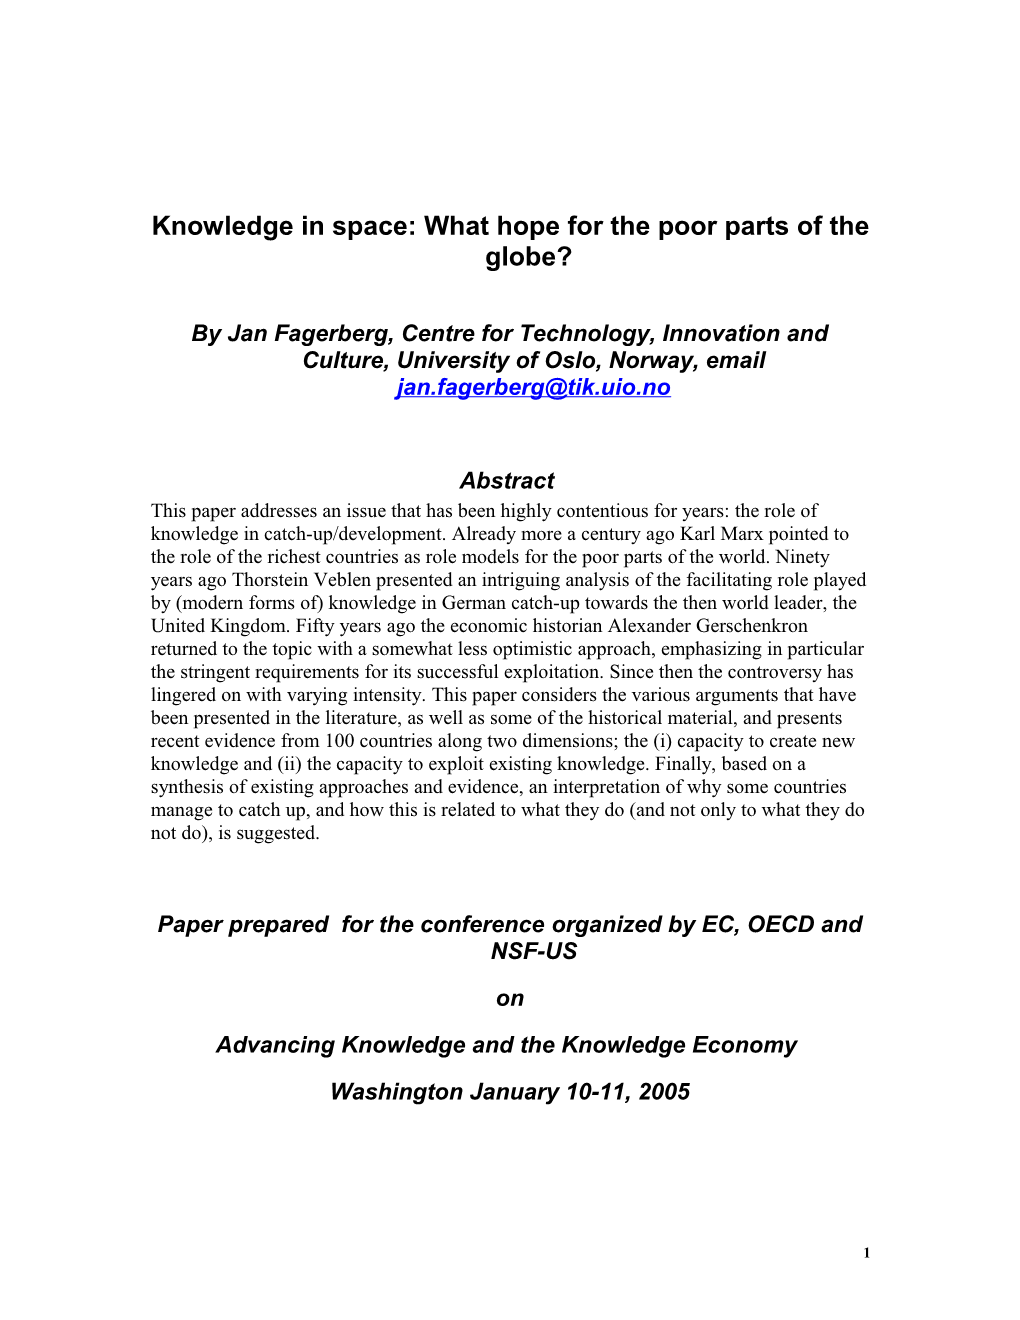 Knowledge In Space: What Hope For The Poor Parts Of The Globe